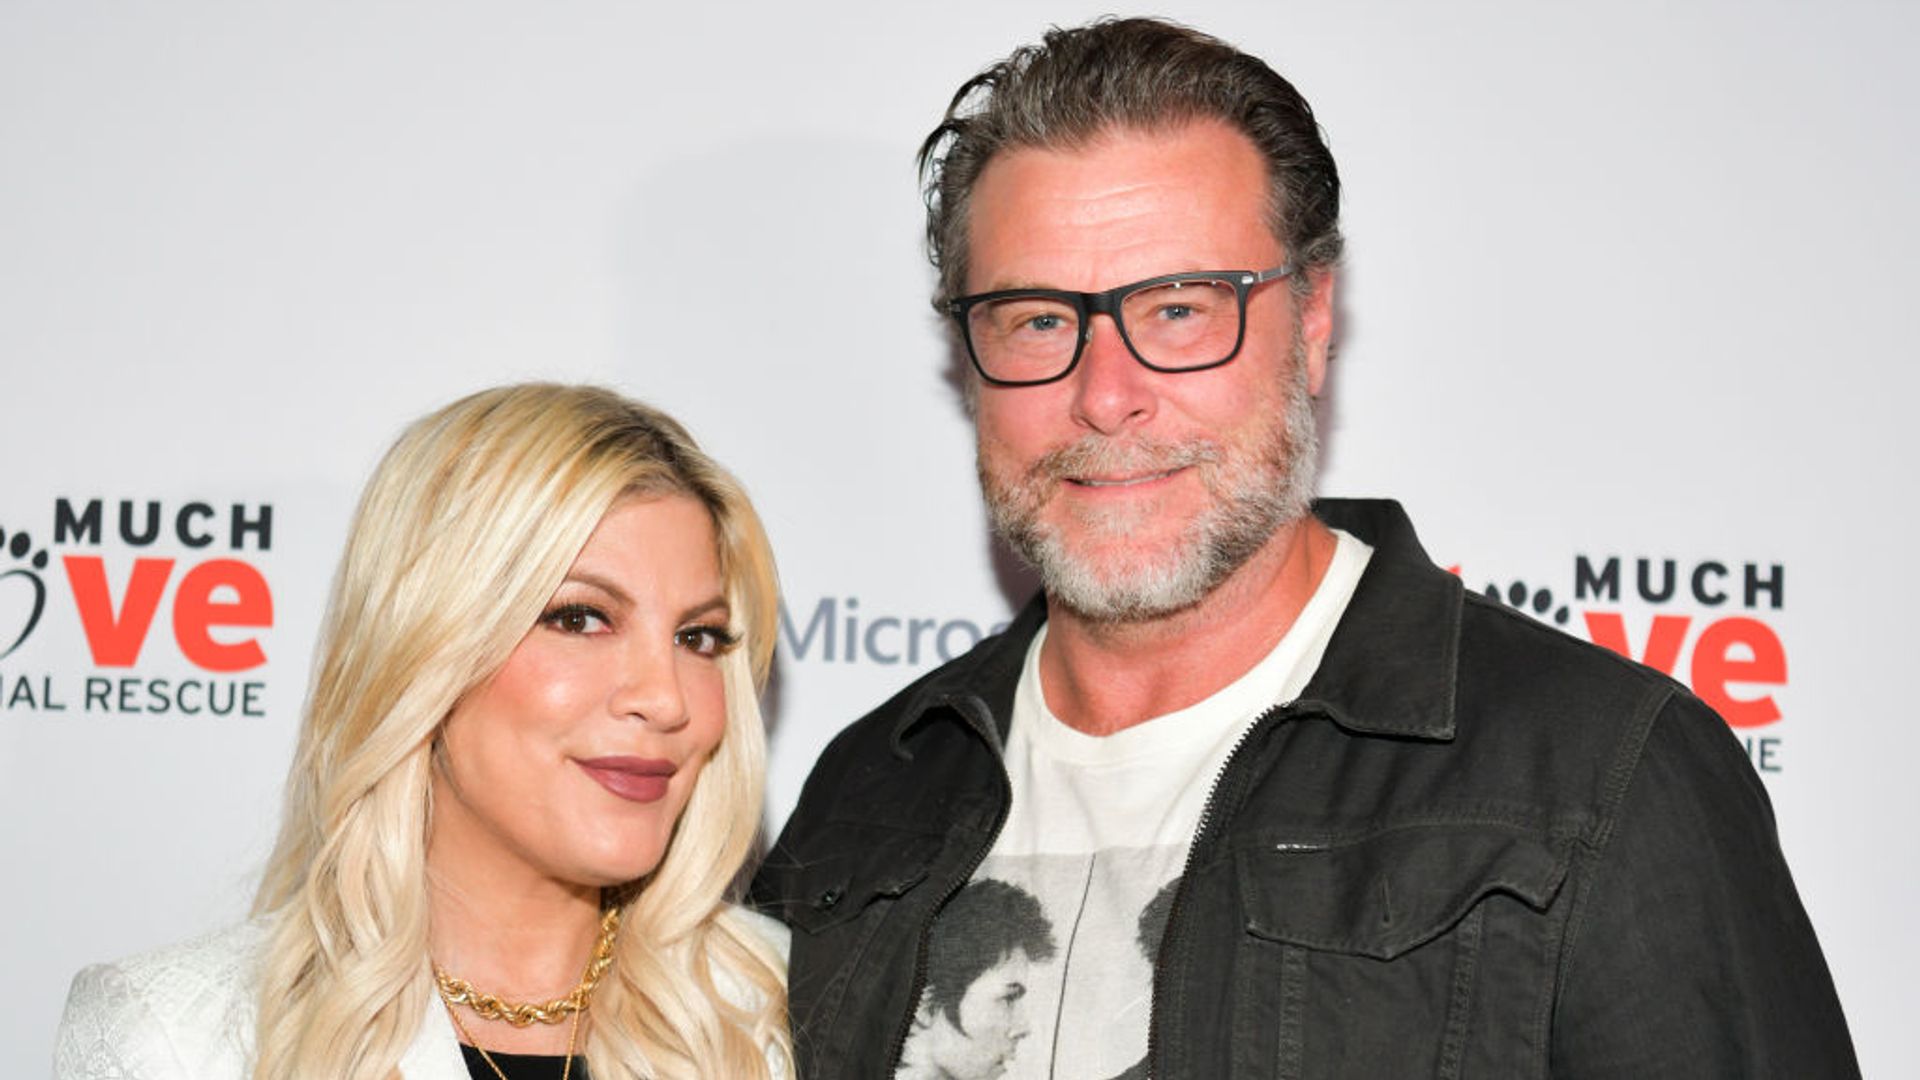 Dean McDermott and Tori Spelling pose together at a red carpet event. 